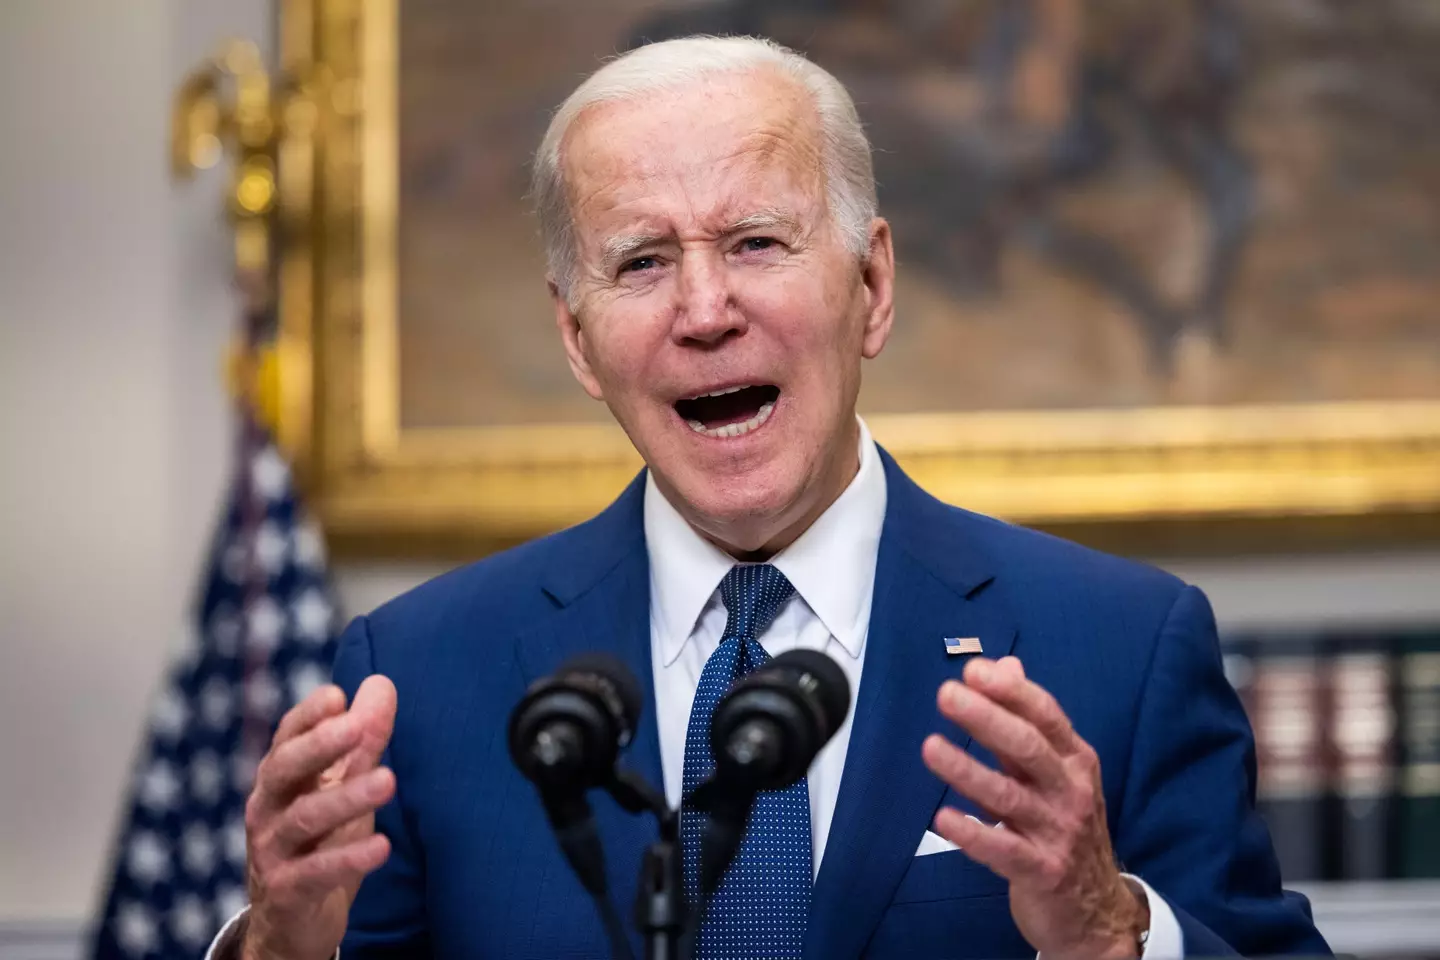 Joe Biden has urged action to be taken to prevent more deaths.